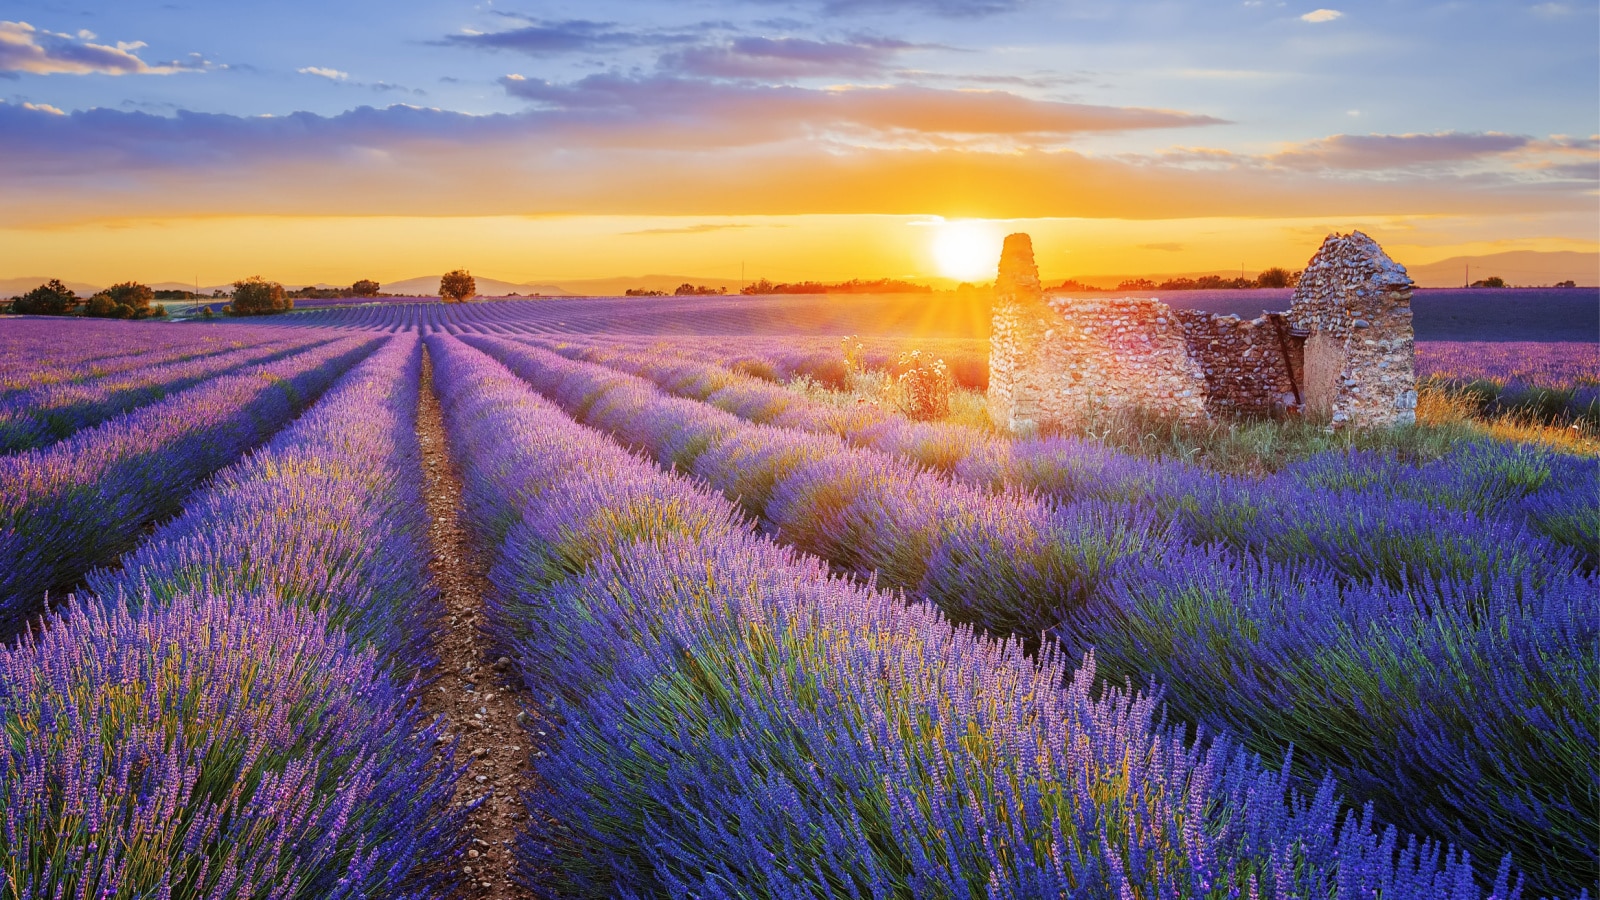 Sun is setting over a beautiful purple lavender filed in Valensole. Provence, France